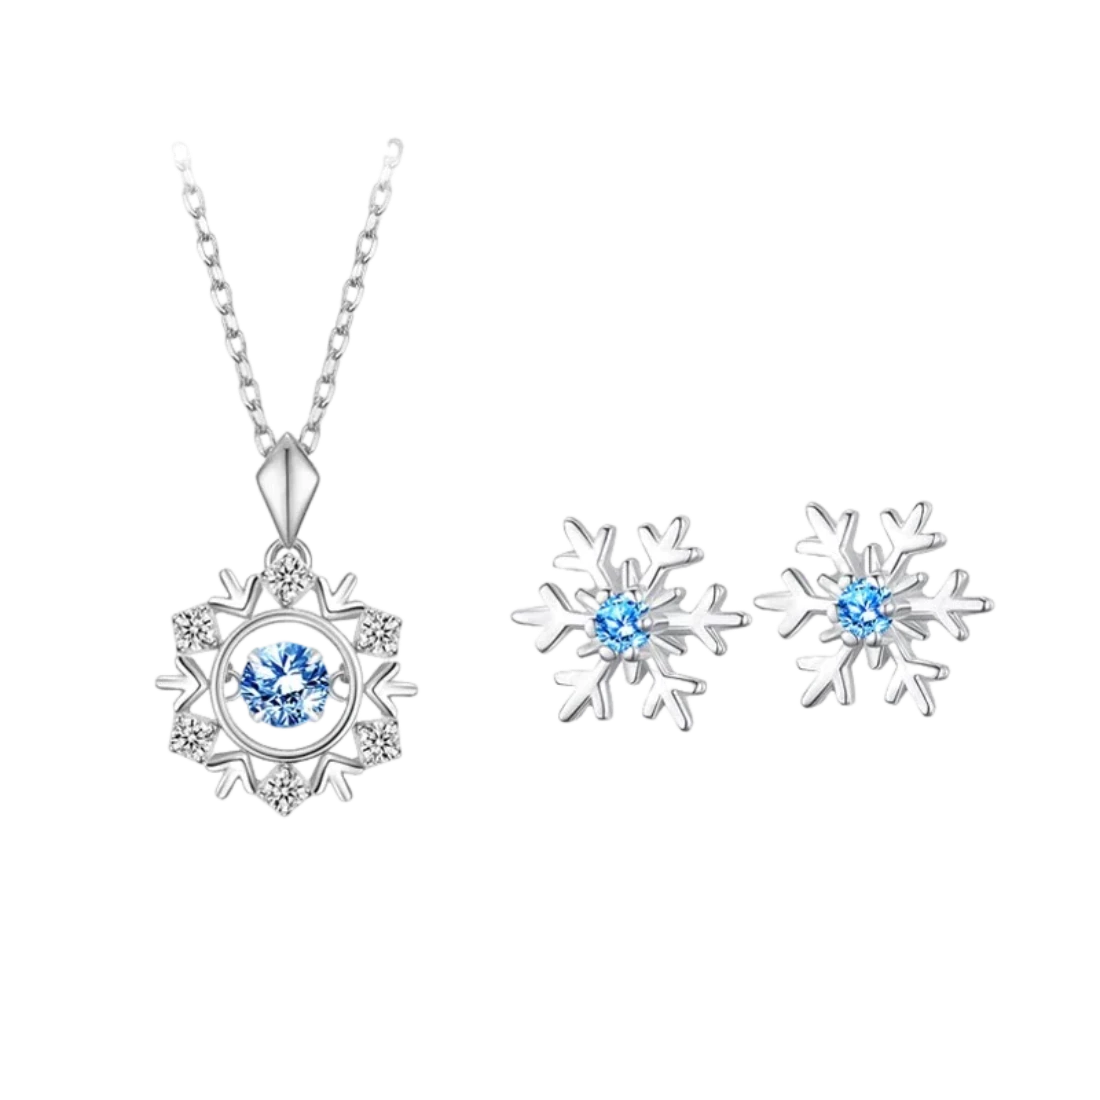 Christmas Floating Diamond Style Necklace Sterling Silver